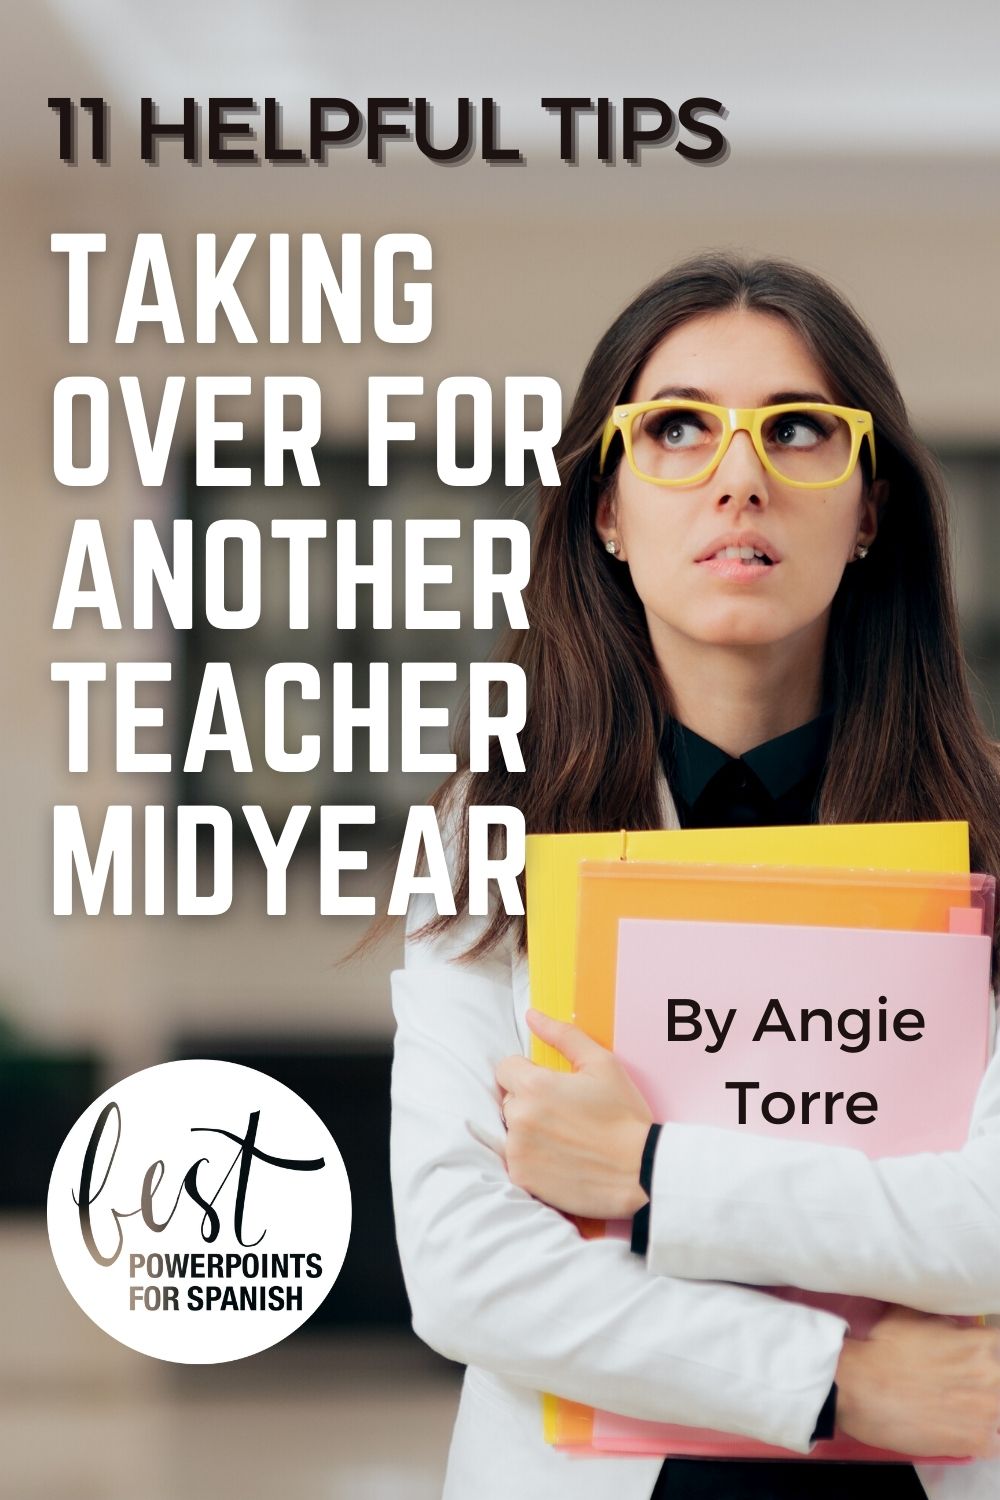 11 Helpful Tips for taking over for another teacher mid-year Teacher reading to students from a book. By Angie Torre